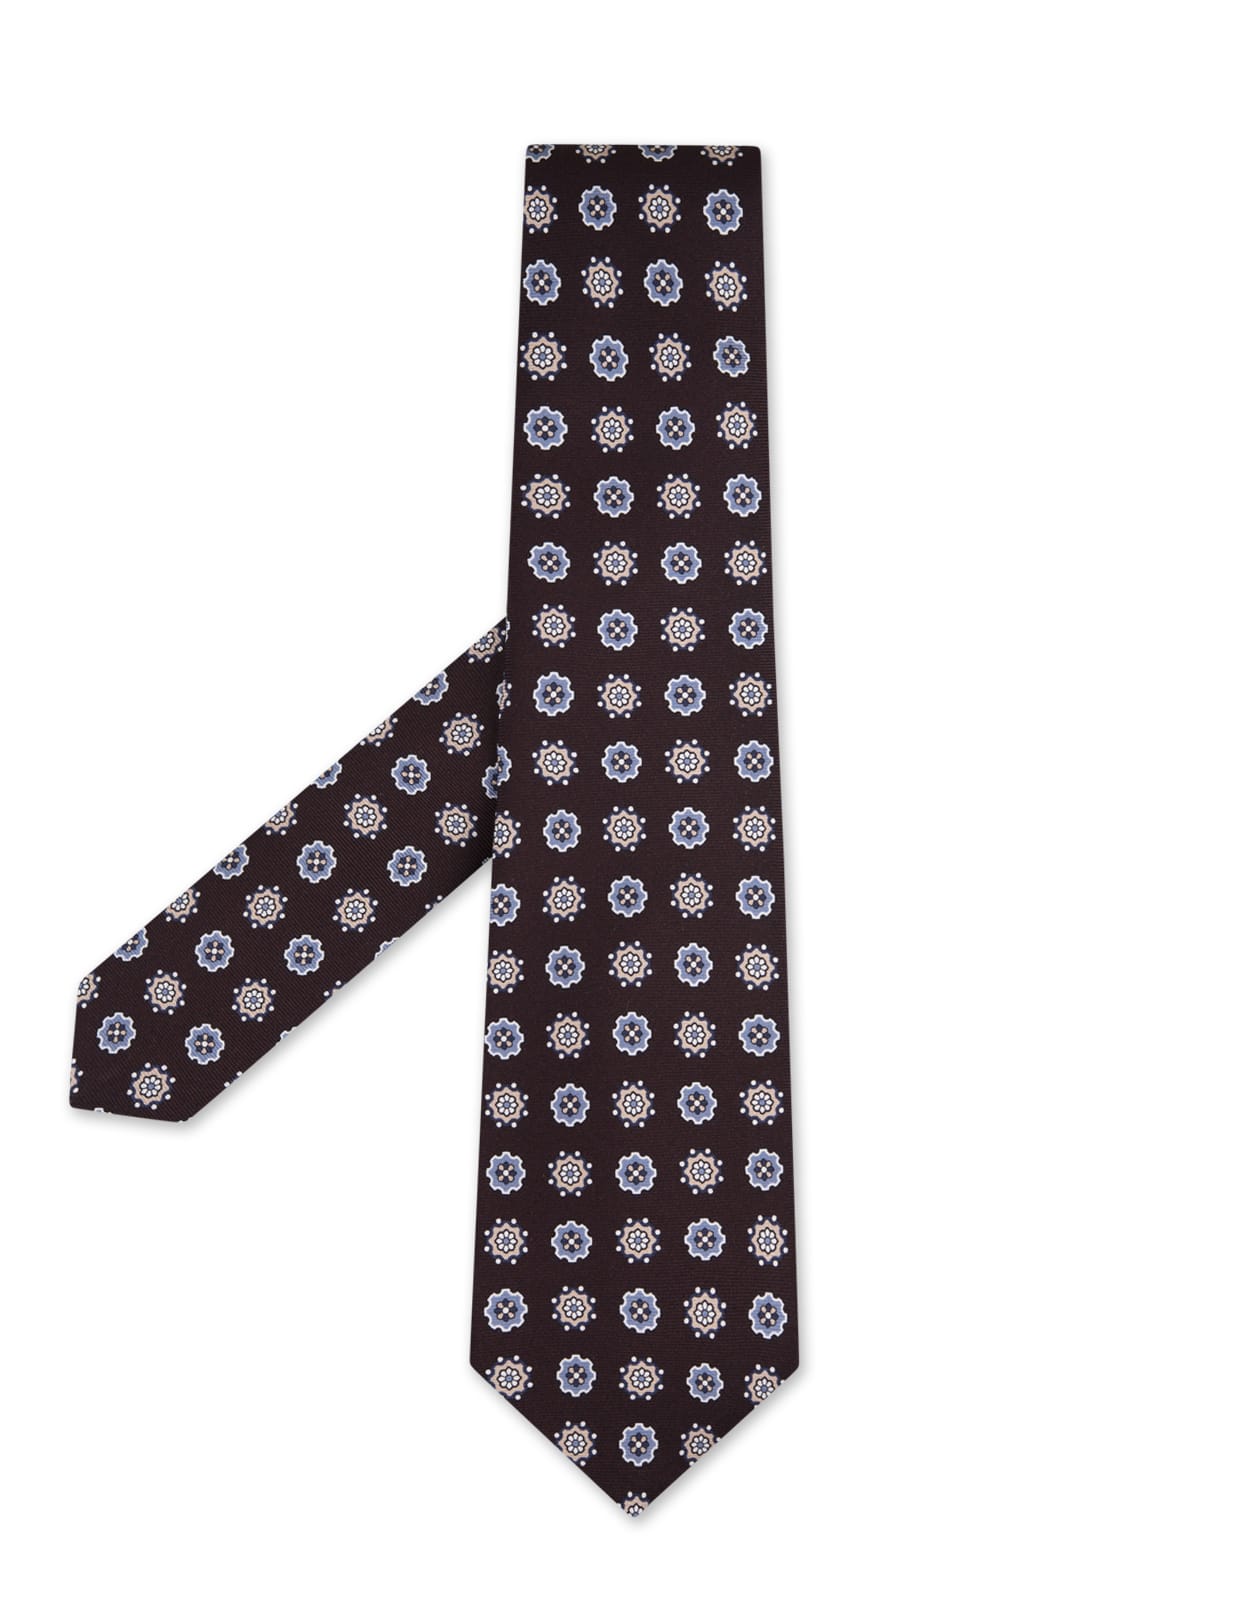 KITON BROWN TIE WITH FLORAL PATTERN